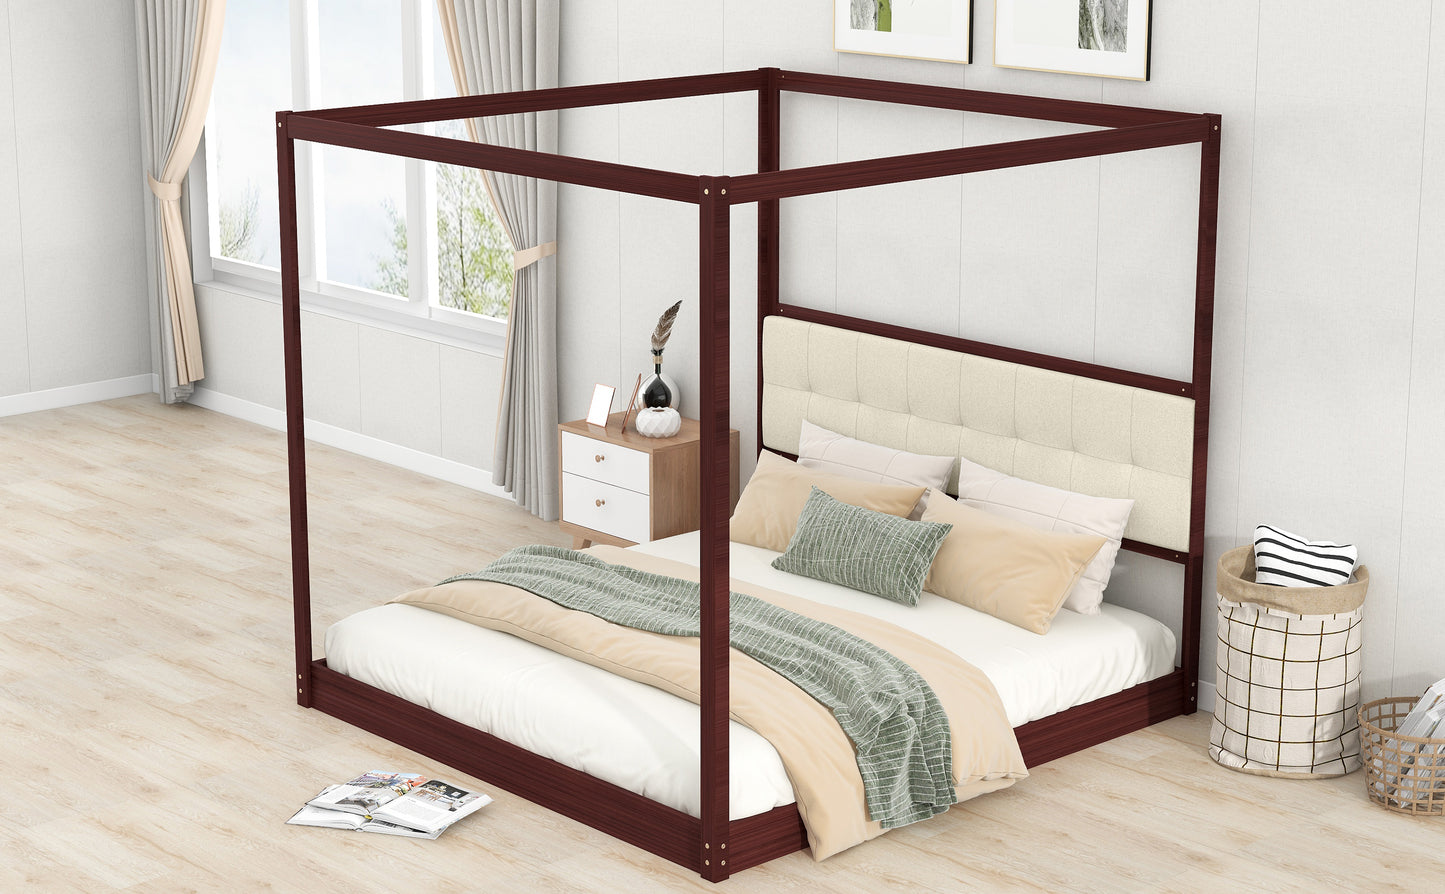 King Size Wooden Canopy Platform Bed with Upholstered Headboard,Espresso